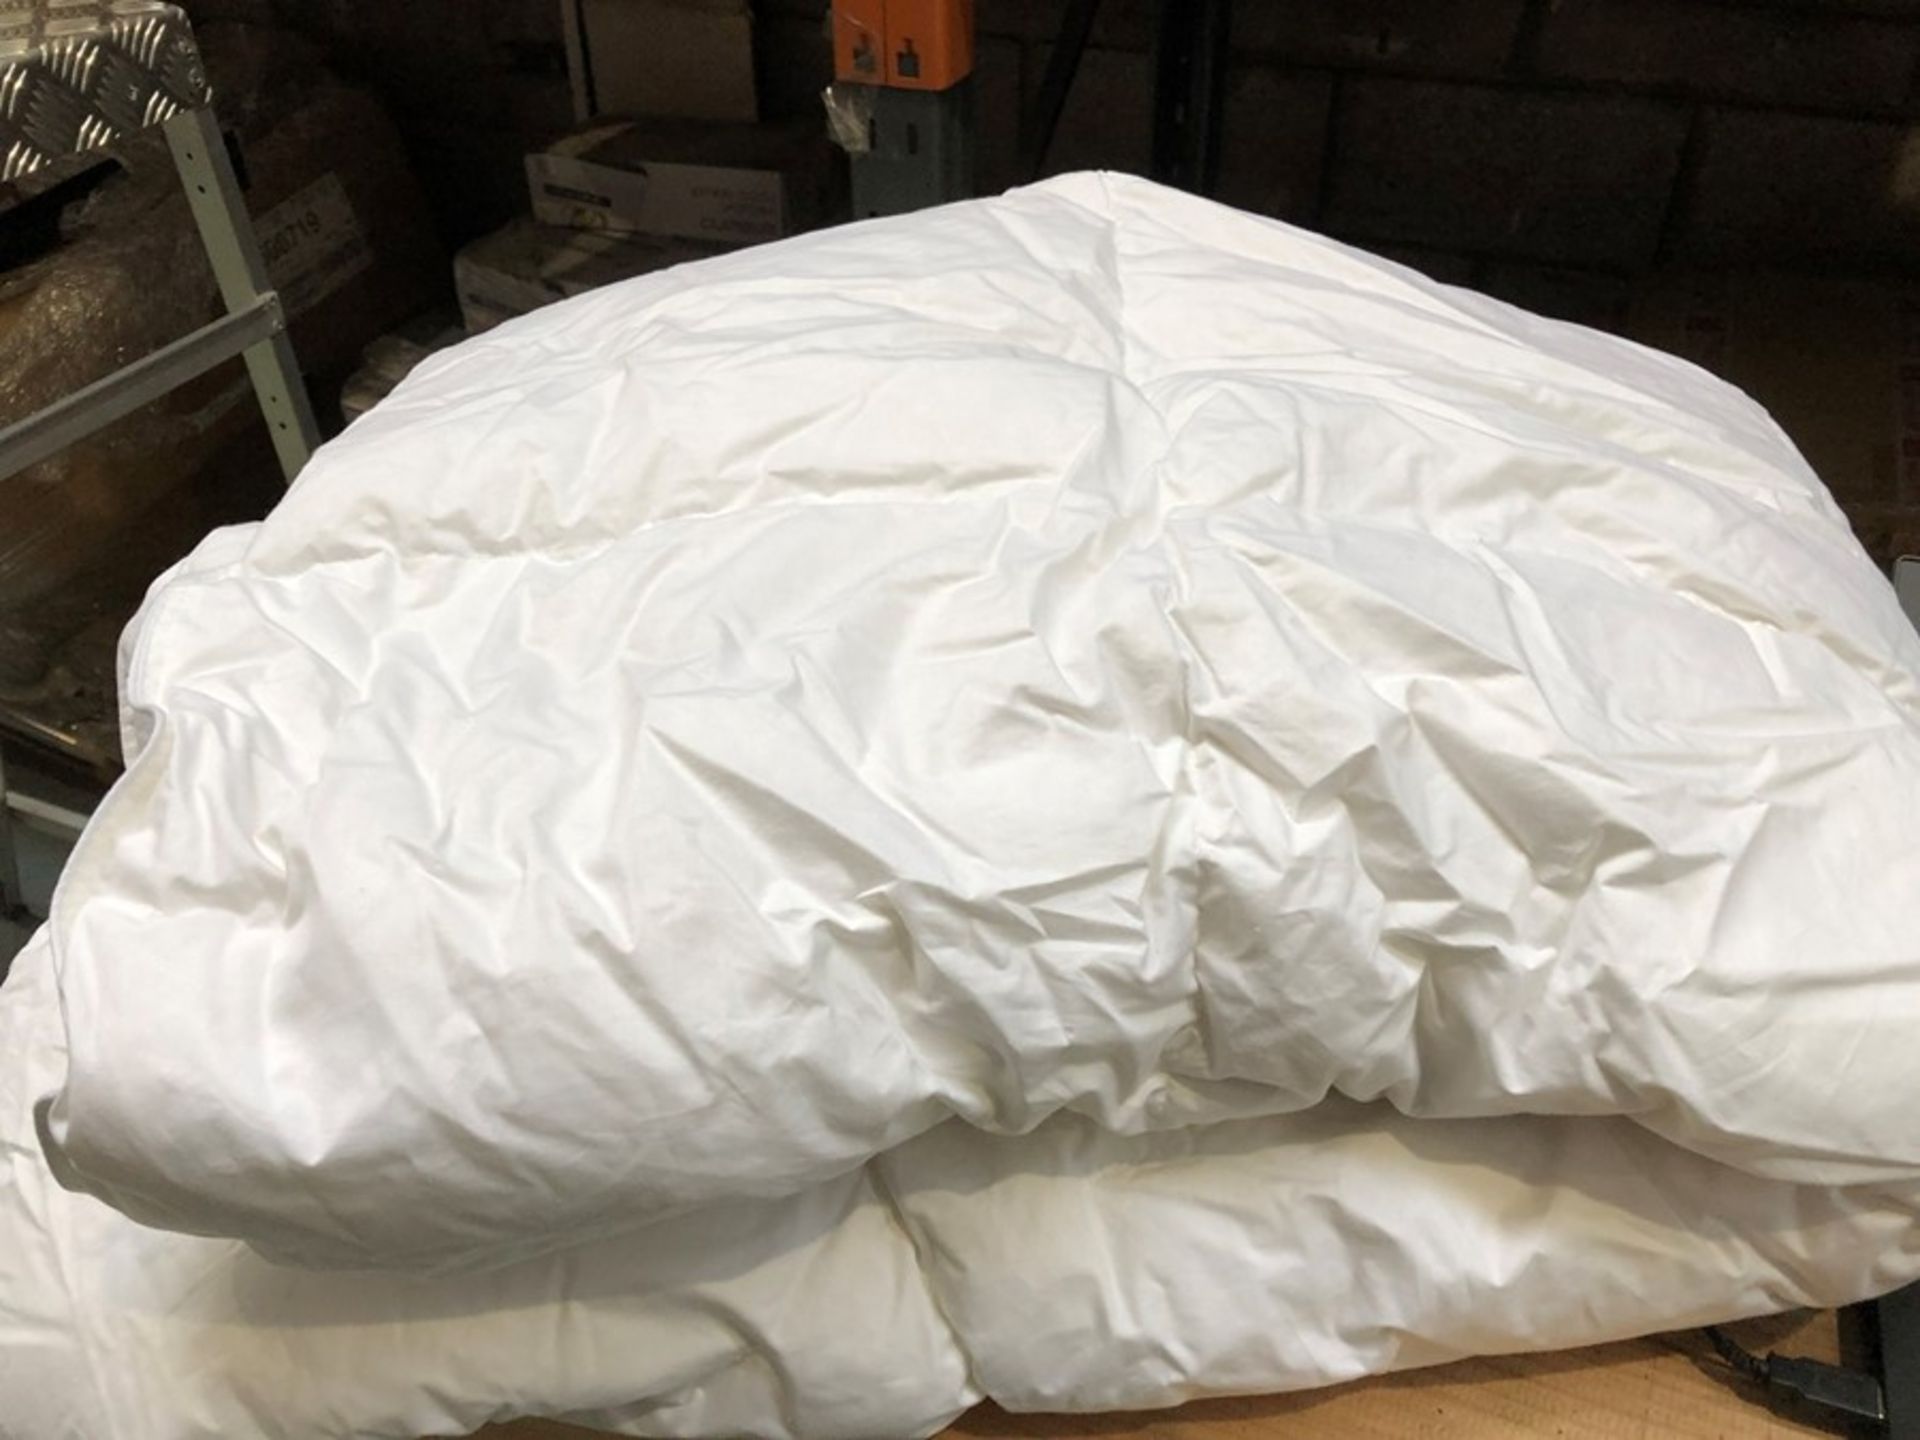 1 HIGH QUALITY SURPRELLE DUVET - WHITE (SOLD AS SEEN)